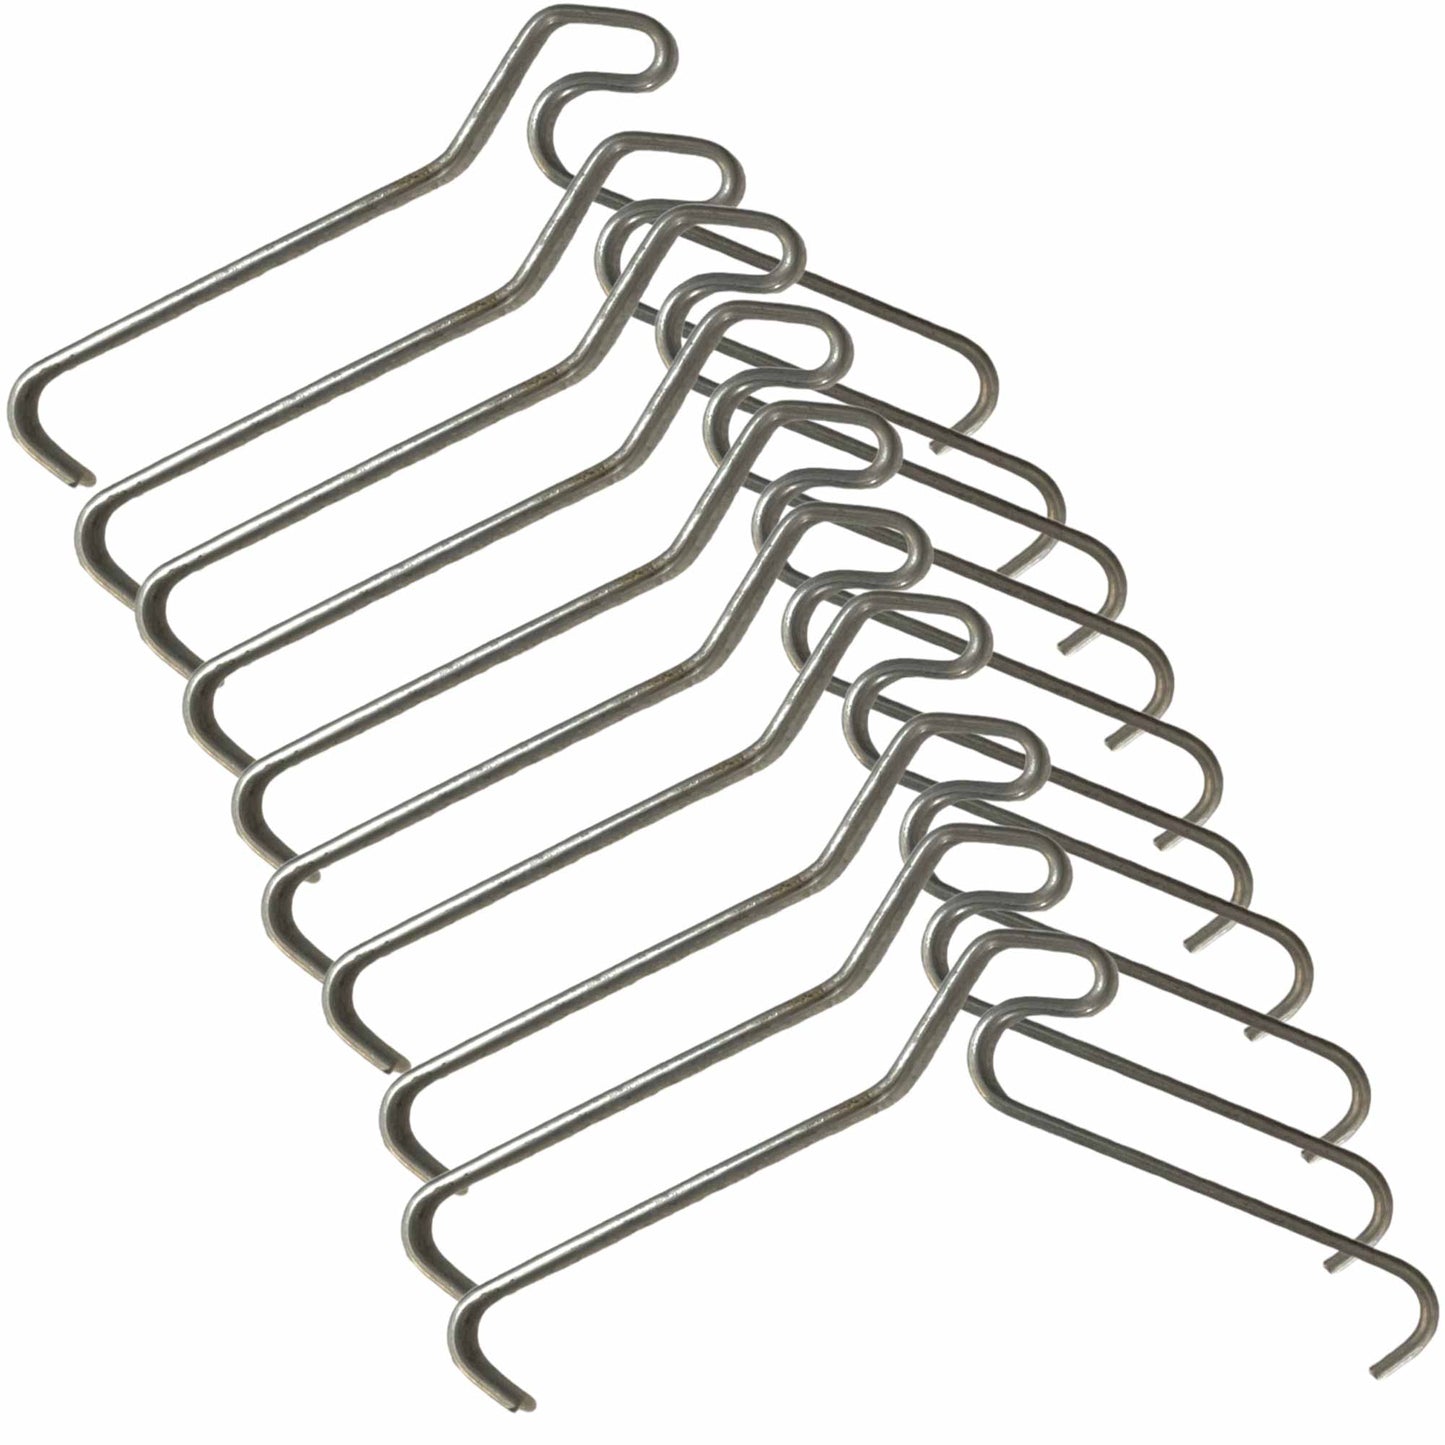 10 Pack Brick Hooks - Wall Crab Clips Hangers - Pictures Pot Plants Outdoor Decor